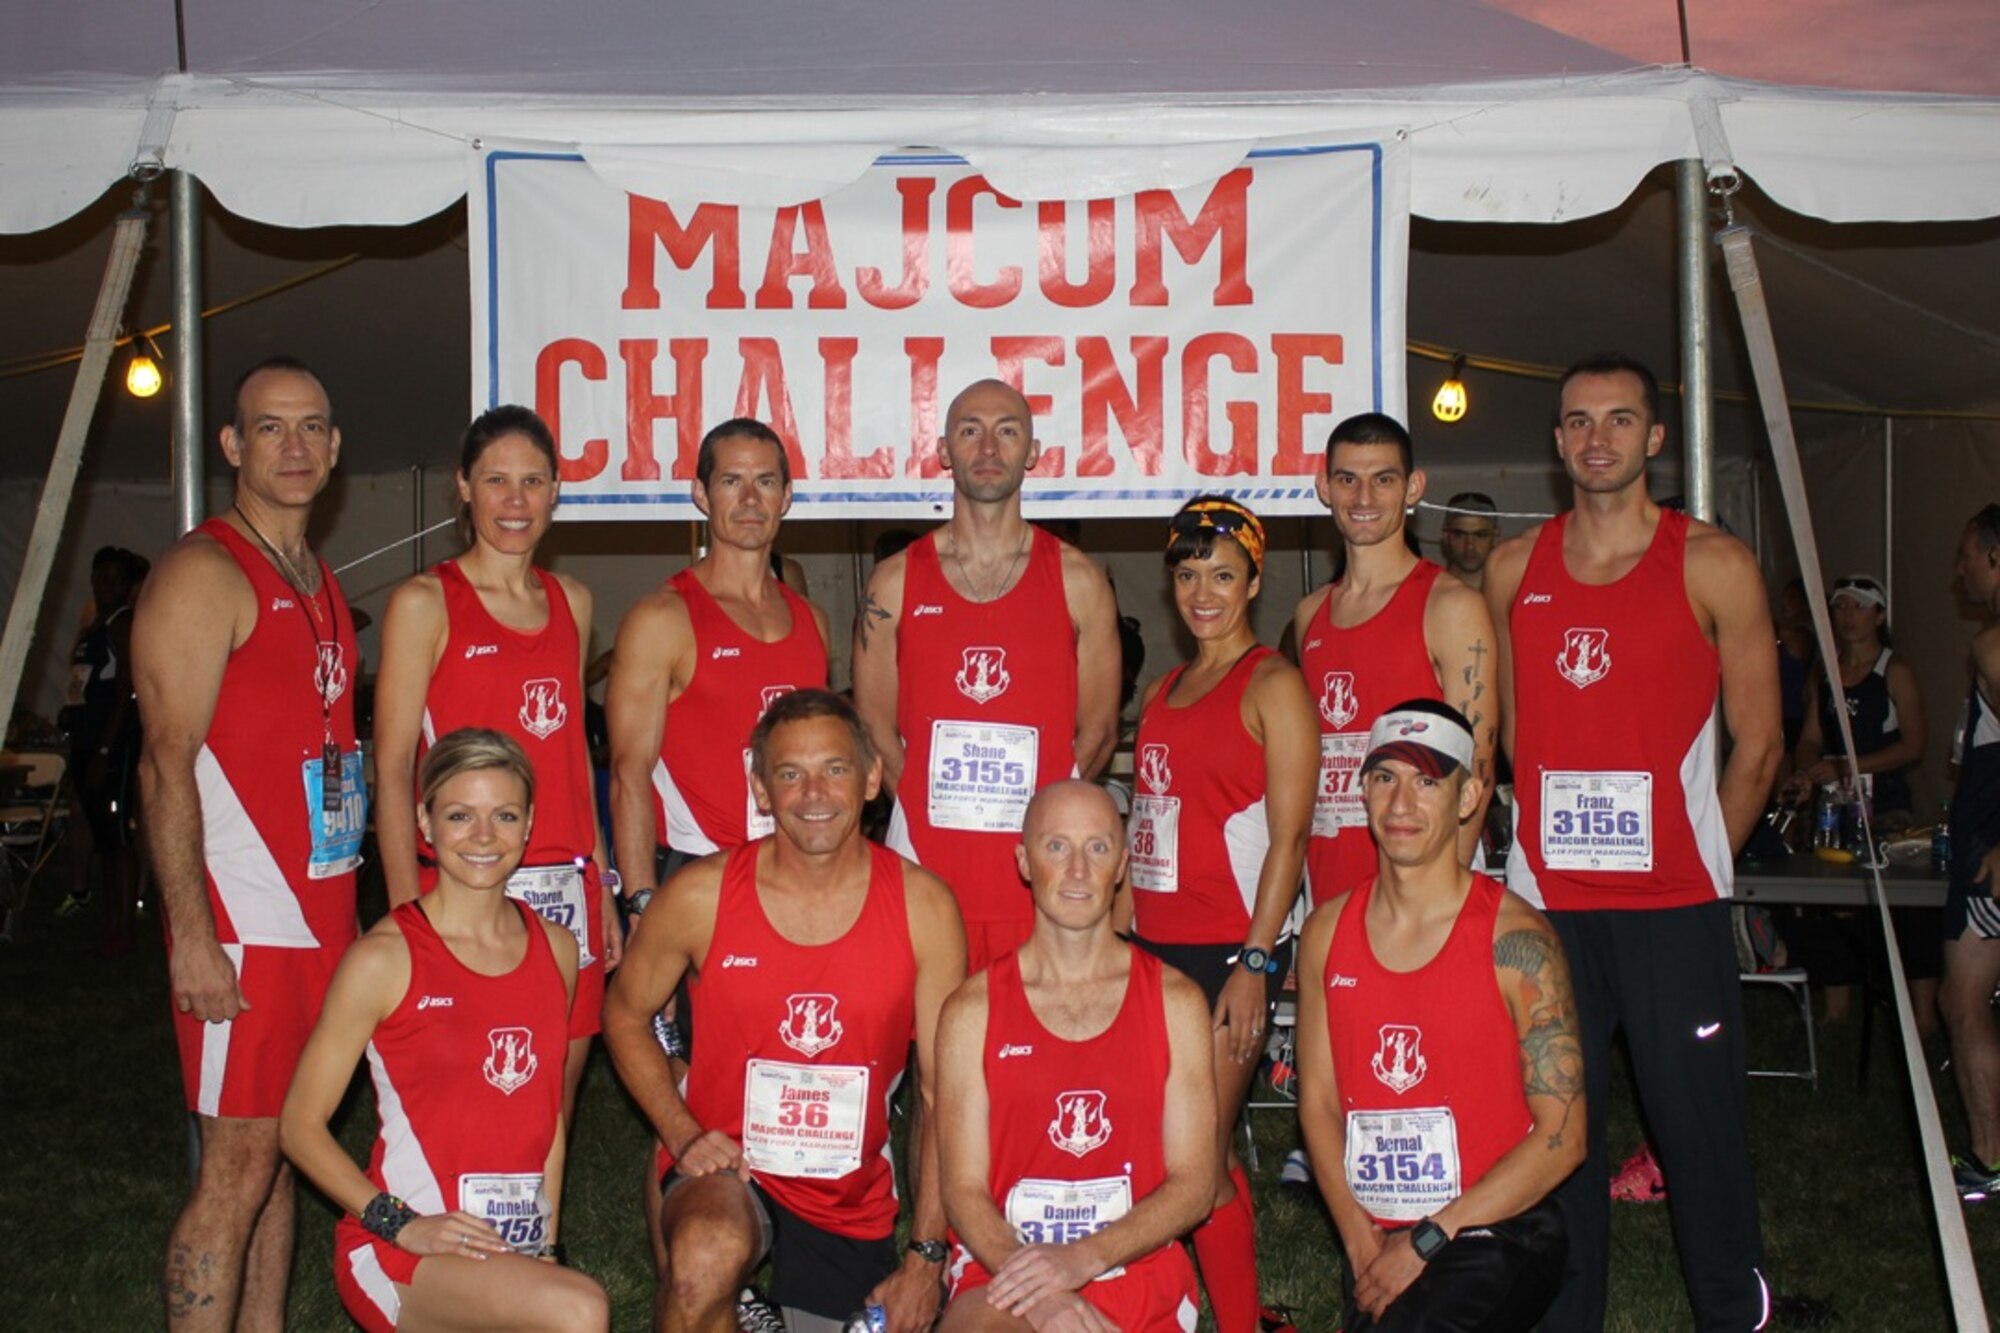 Maj. Sharon Ehasz (top, second left), 192nd Fighter Wing Equal Opportunity director, competed in the U.S. Air Force Marathon as a member of the Air National Guard MAJCOM challenge team on September 18, 2015 at the National Museum of the United States Air Force, Wright-Patterson Air Force Base, Ohio. The ANG team competed against 11 other Major Command teams and placed second overall in the challenge. (U.S. Air Force photo/Released)